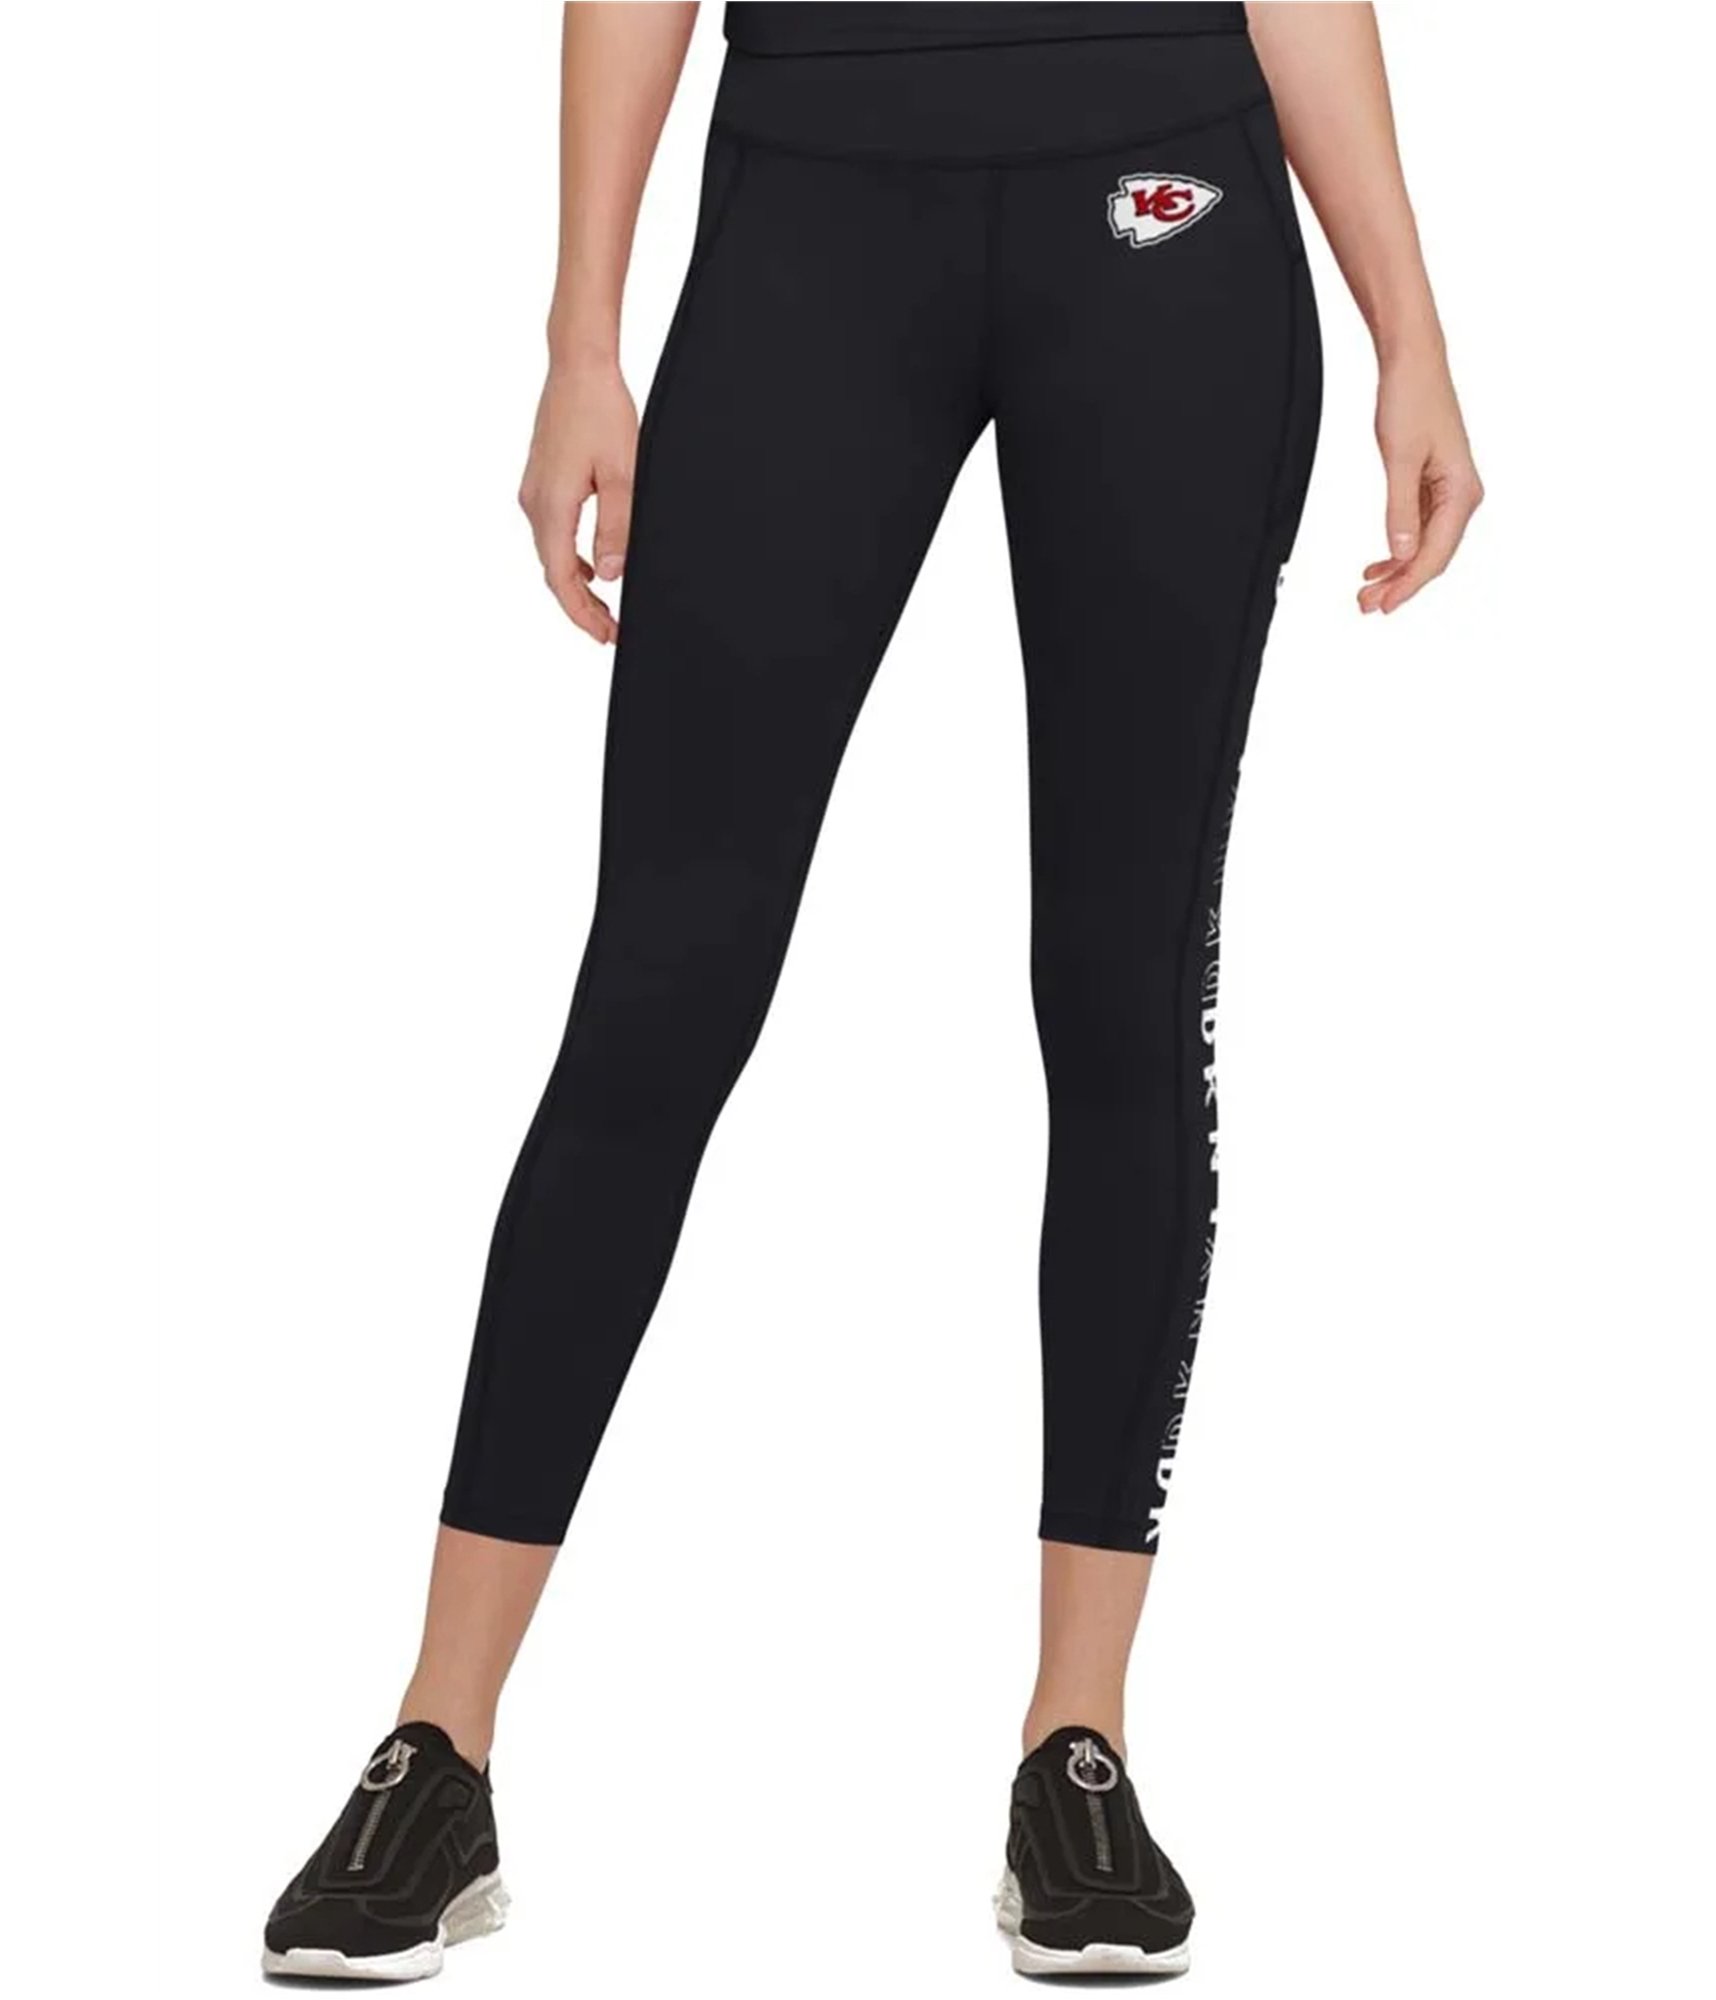 Buy a Dkny Womens Kansas City Chiefs Compression Athletic Pants, TW2